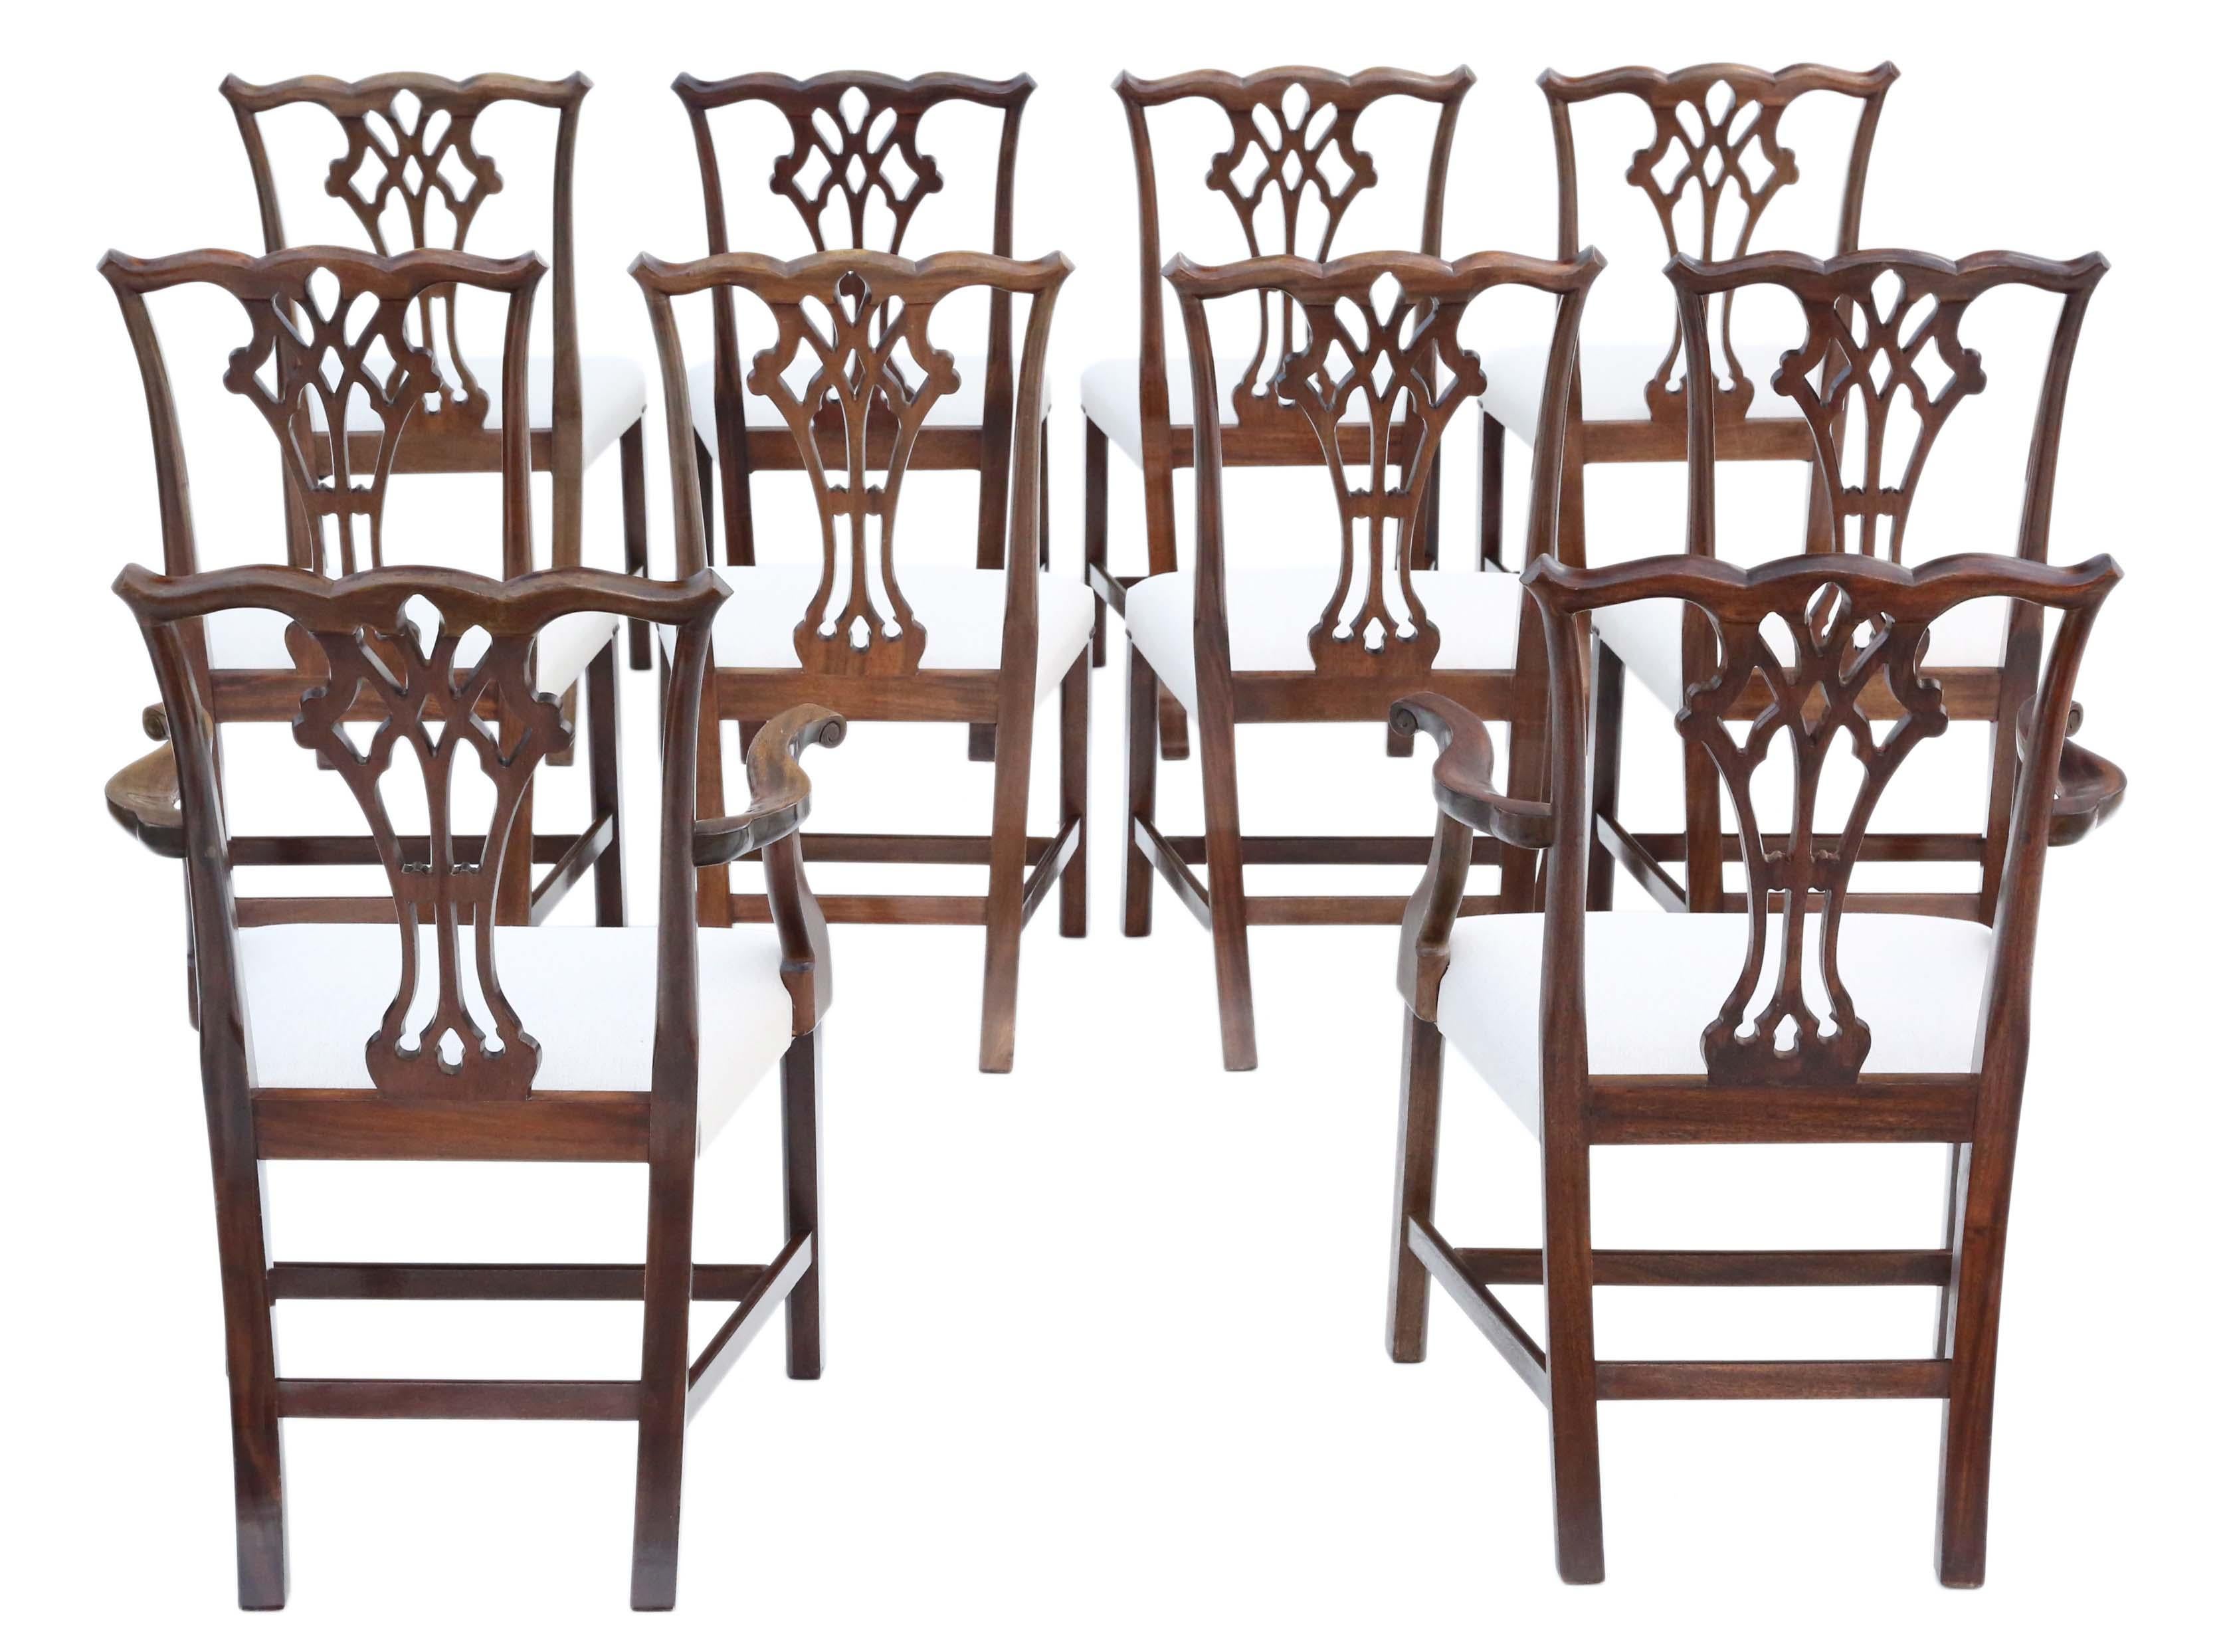 Antique fine quality set of 10 (8+2) mahogany Georgian revival C1920-50 dining chairs ribbon back. Large generous seats.

No loose joints and no woodworm.

Professionally reupholstered.

Overall maximum dimensions:

Carver 65cmW x 53cmD x